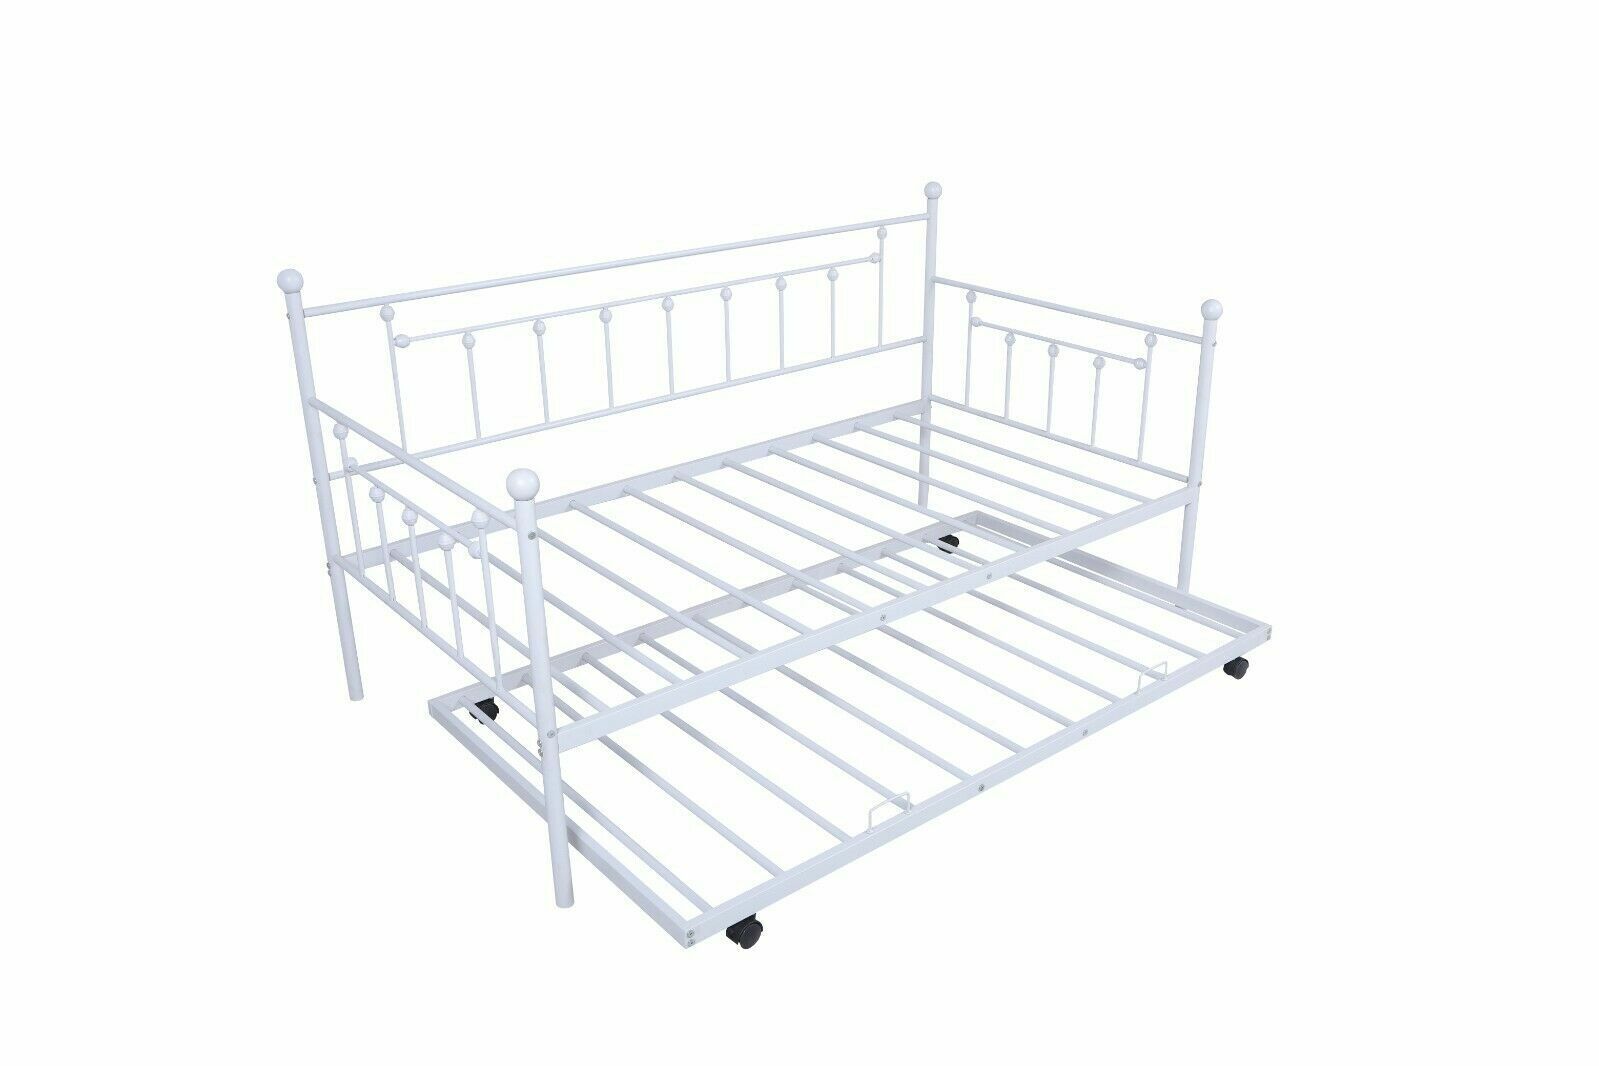 Metal Frame Daybed with Trundle Bedroom Furniture Space Saving For Kids Adults Fetines Does Not Apply - фотография #6